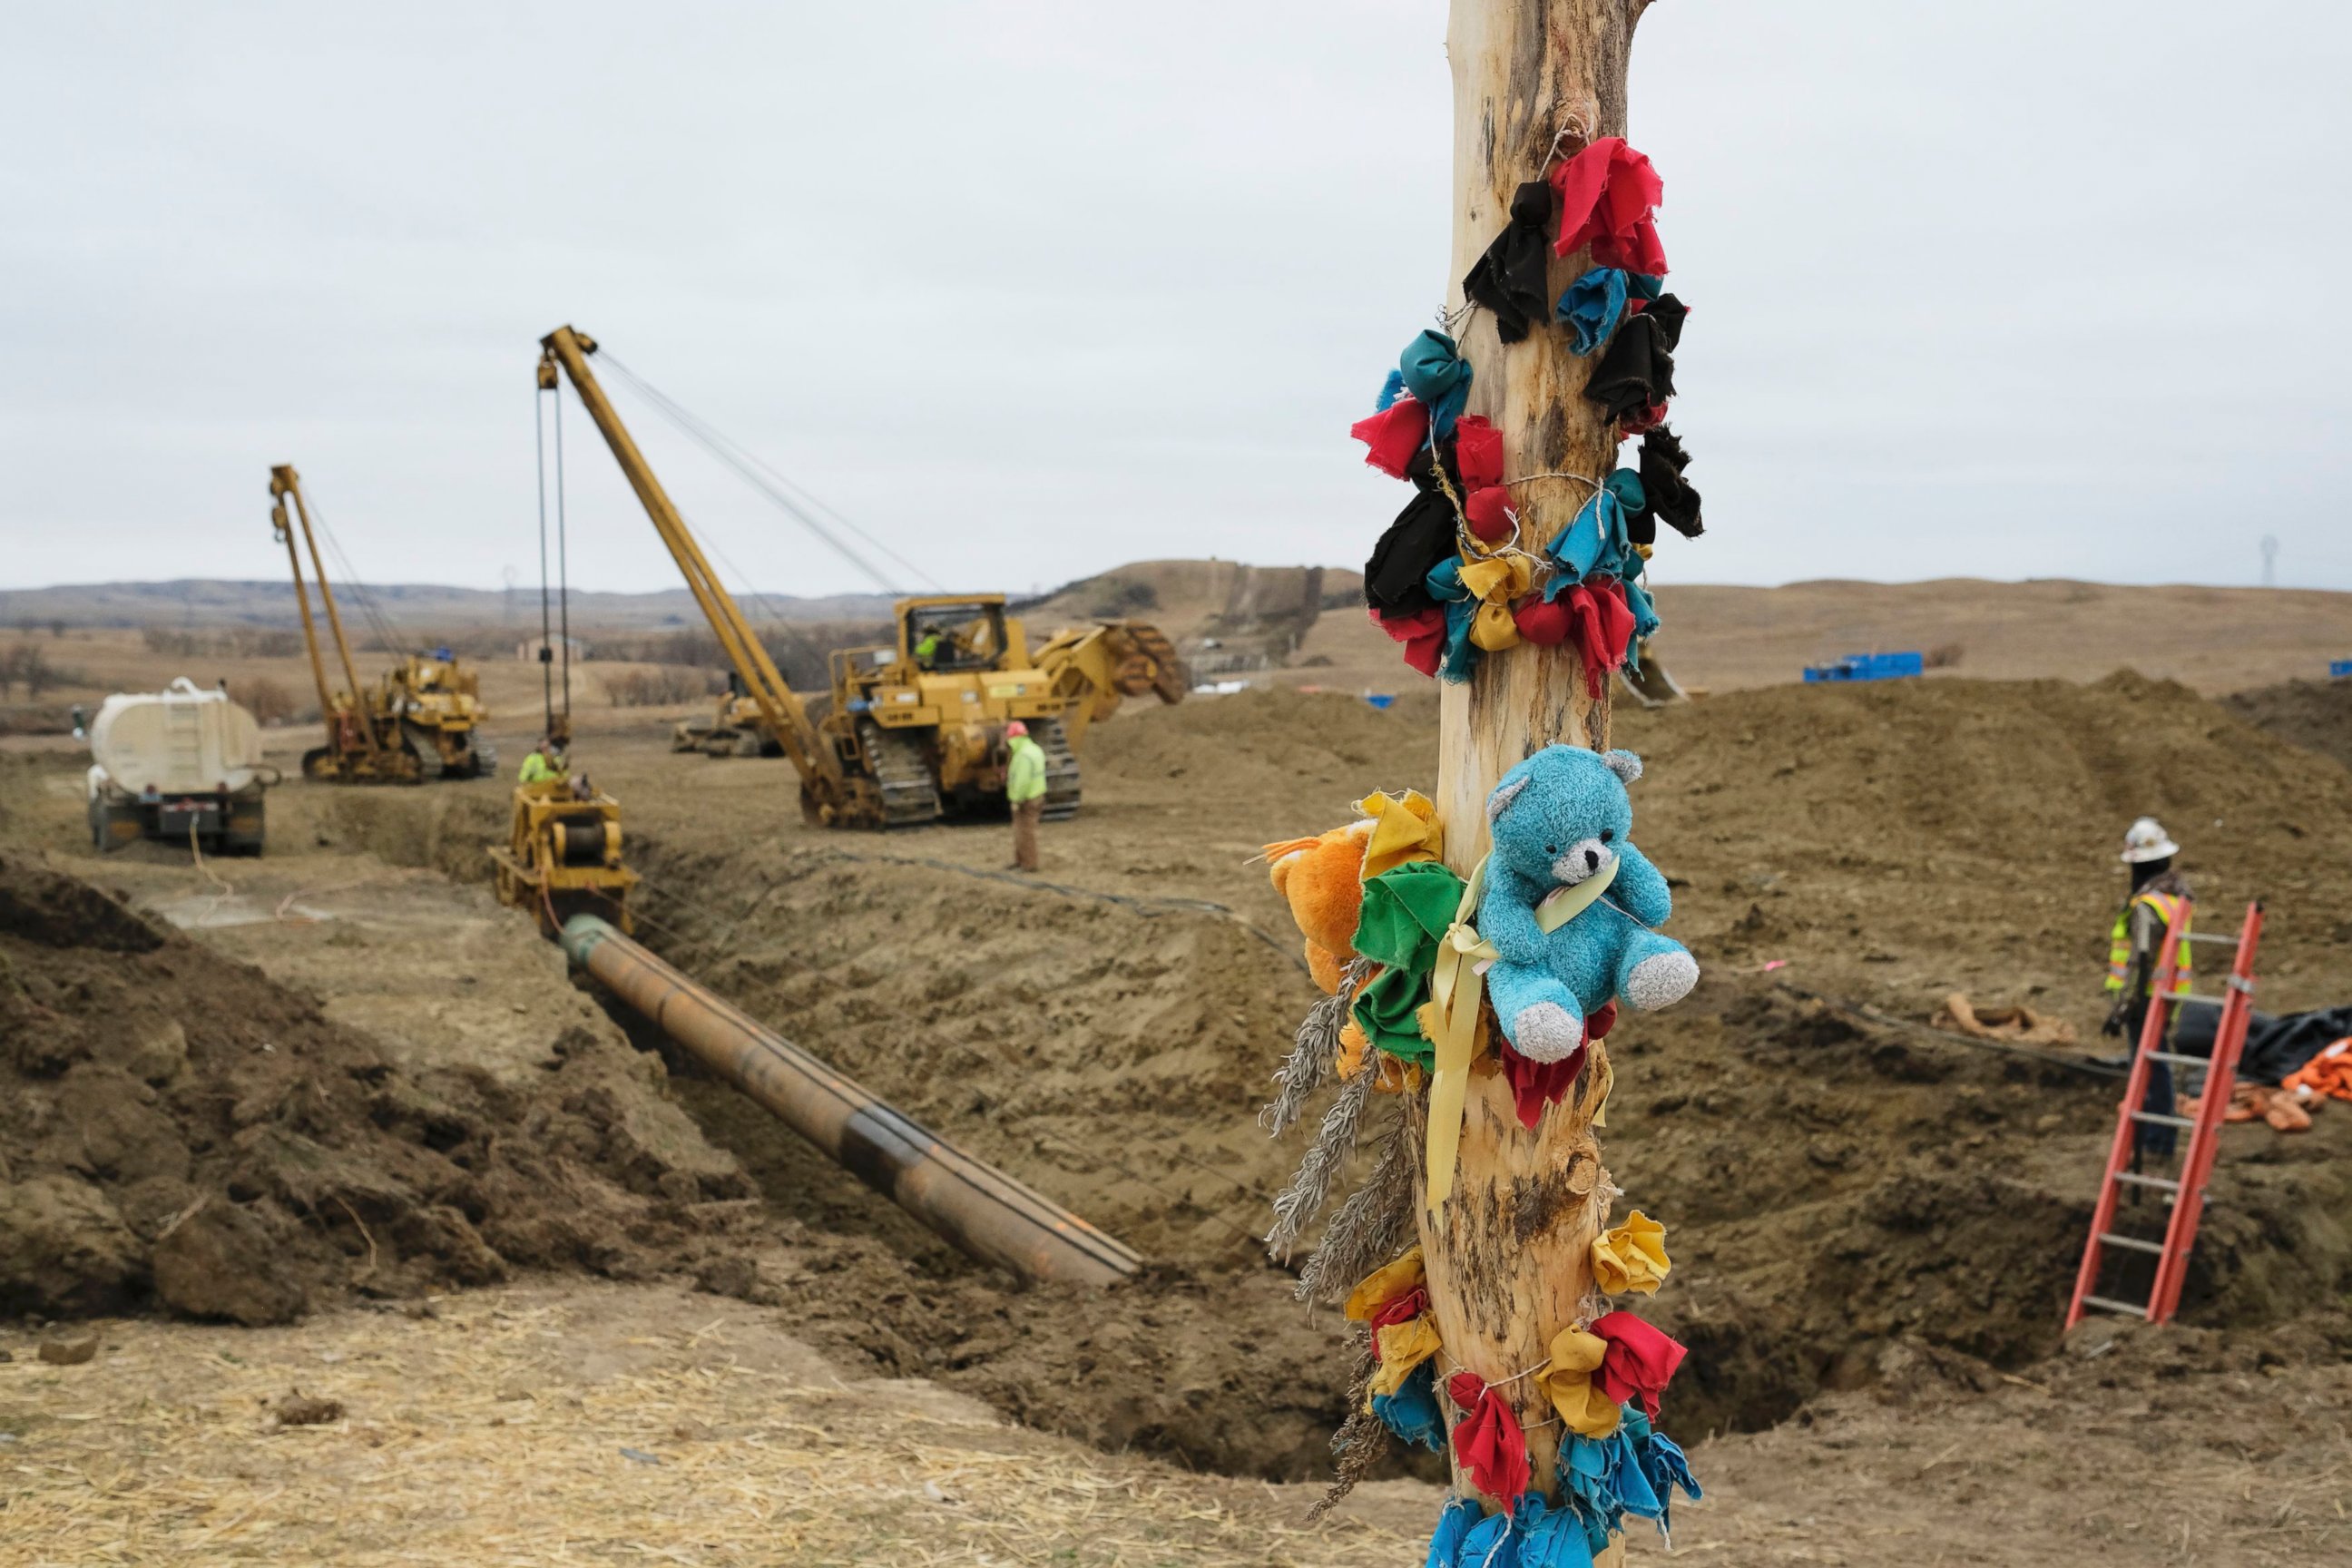 PHOTO: A log adorned with colorful decorations remains at a Dakota Access Pipeline protest encampment as construction work continues on the pipeline near the town of Cannon Ball, North Dakota, Oct. 30, 2016. 